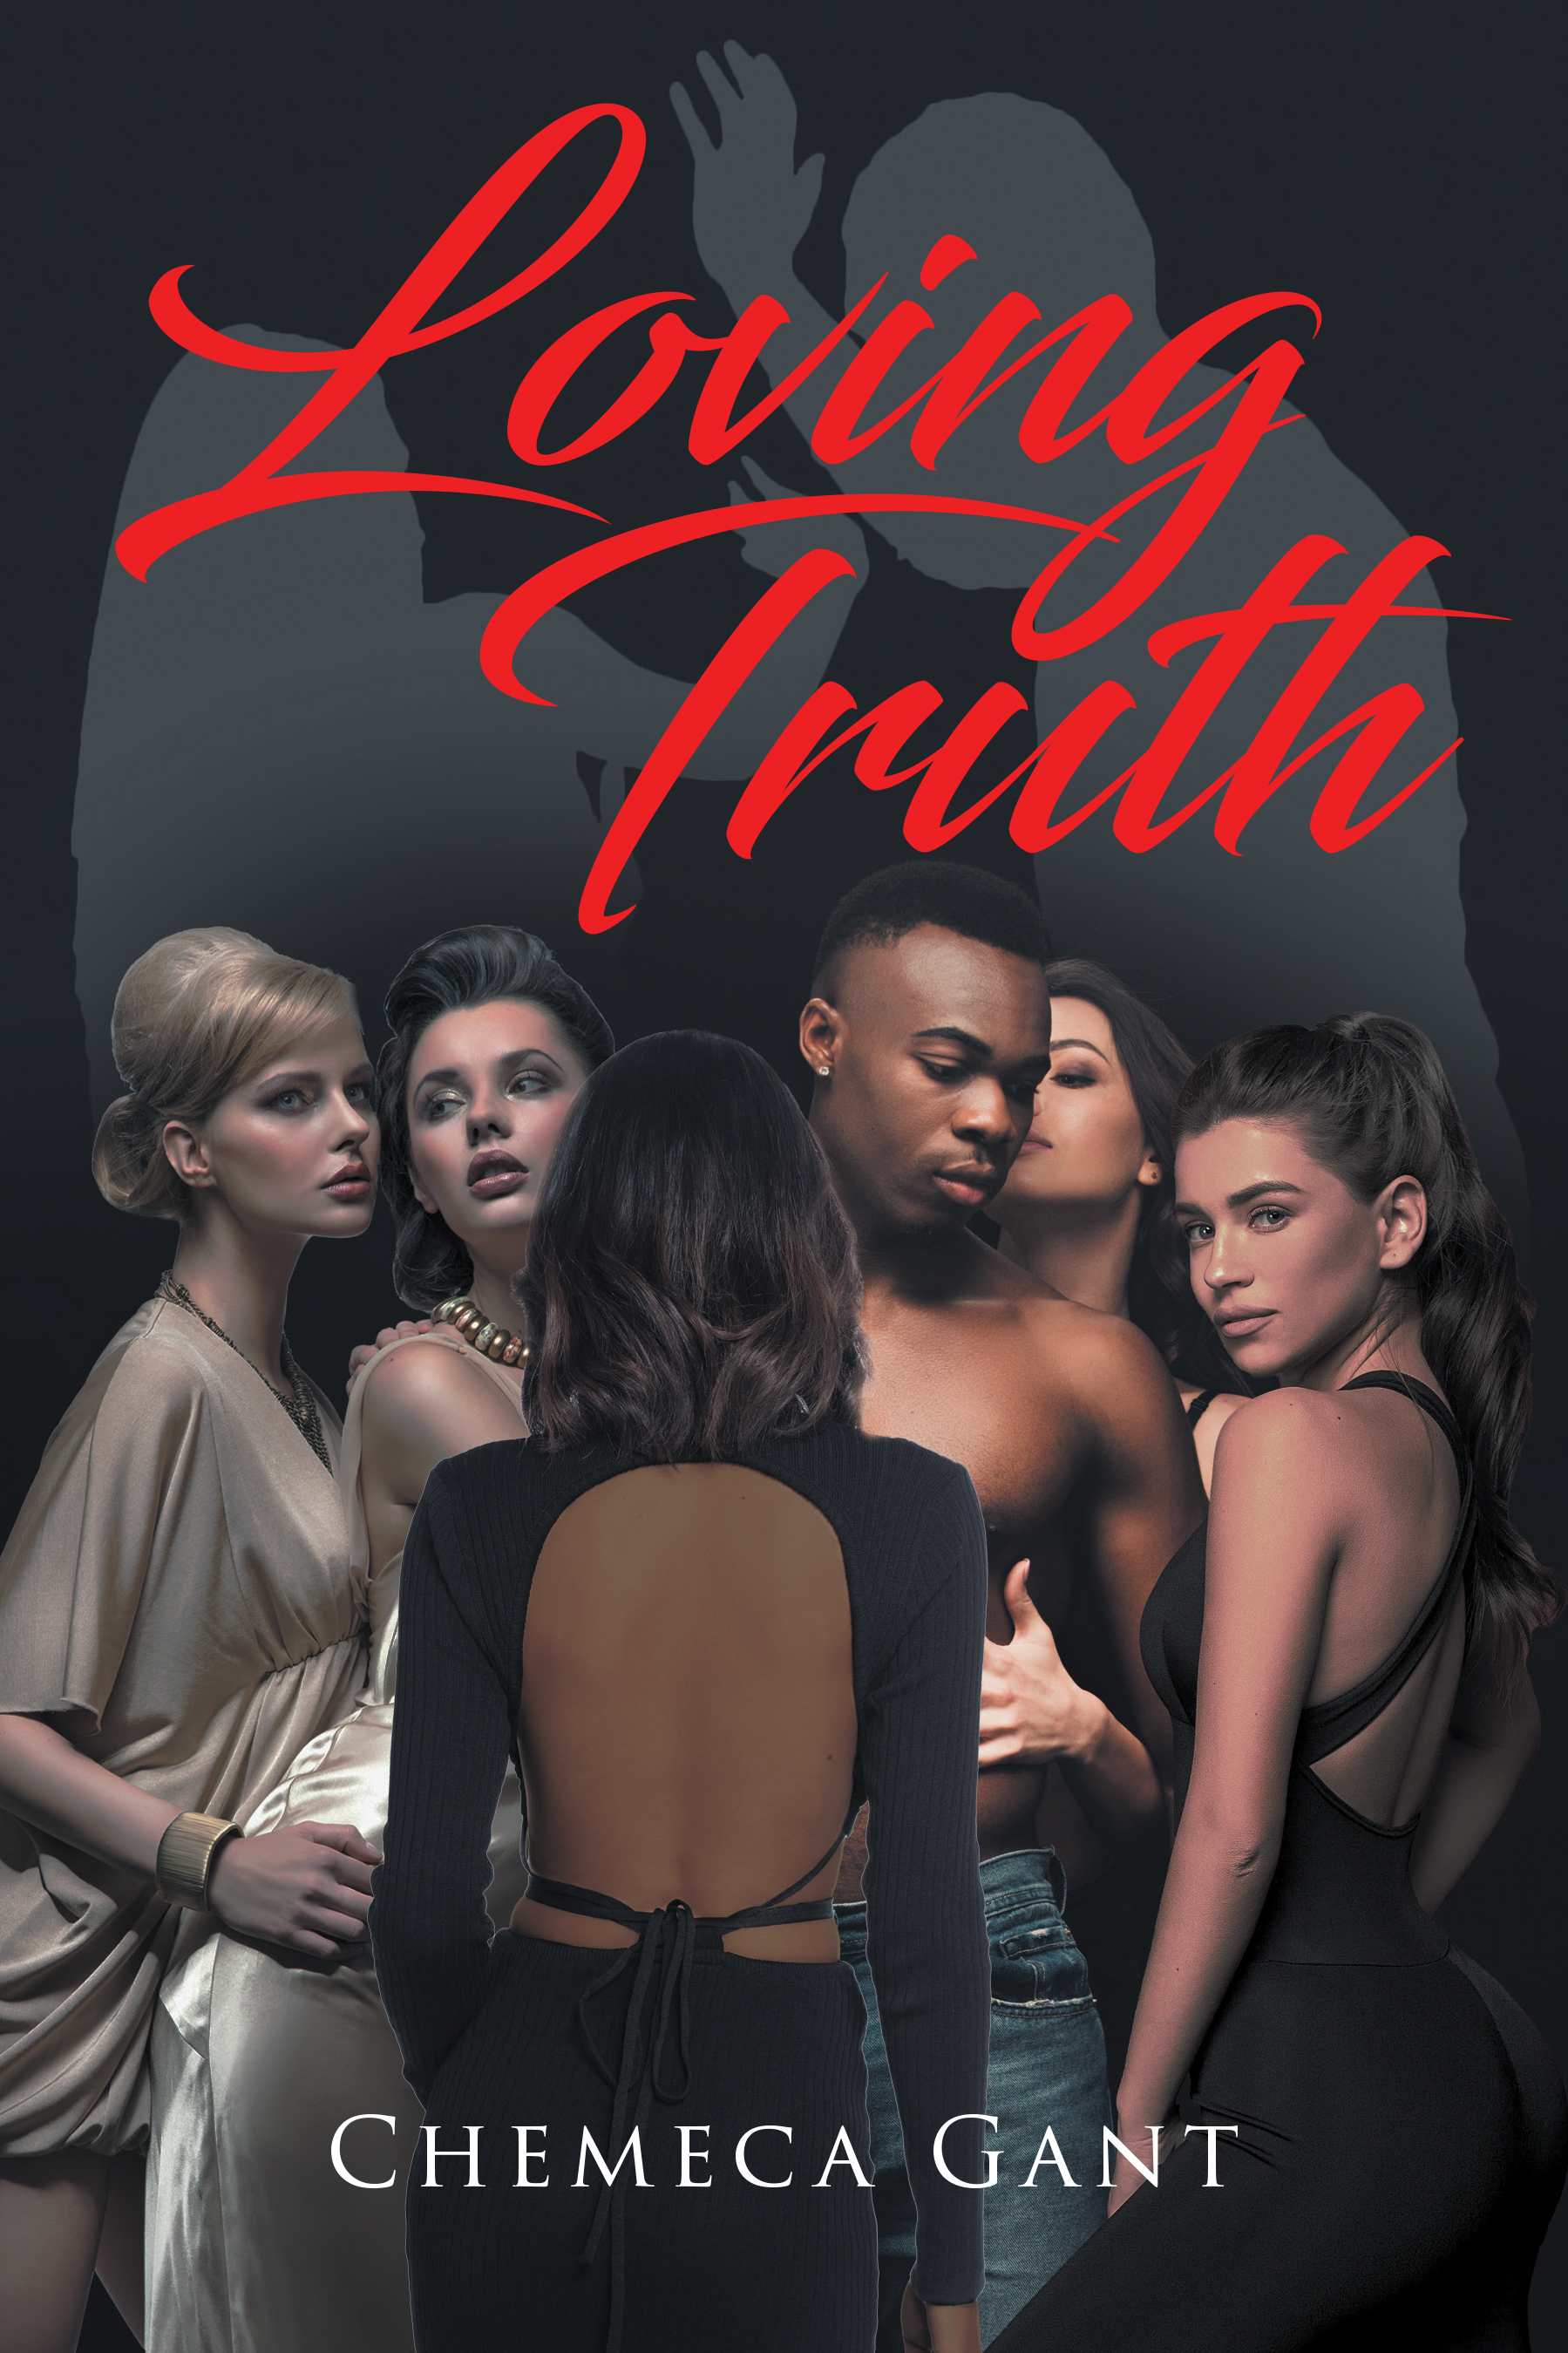 Author Chemeca Gant’s New Book, "Loving Truth," is a Chilling and Engrossing Novel About a Family Caught in a Downward Spiral of Abuse